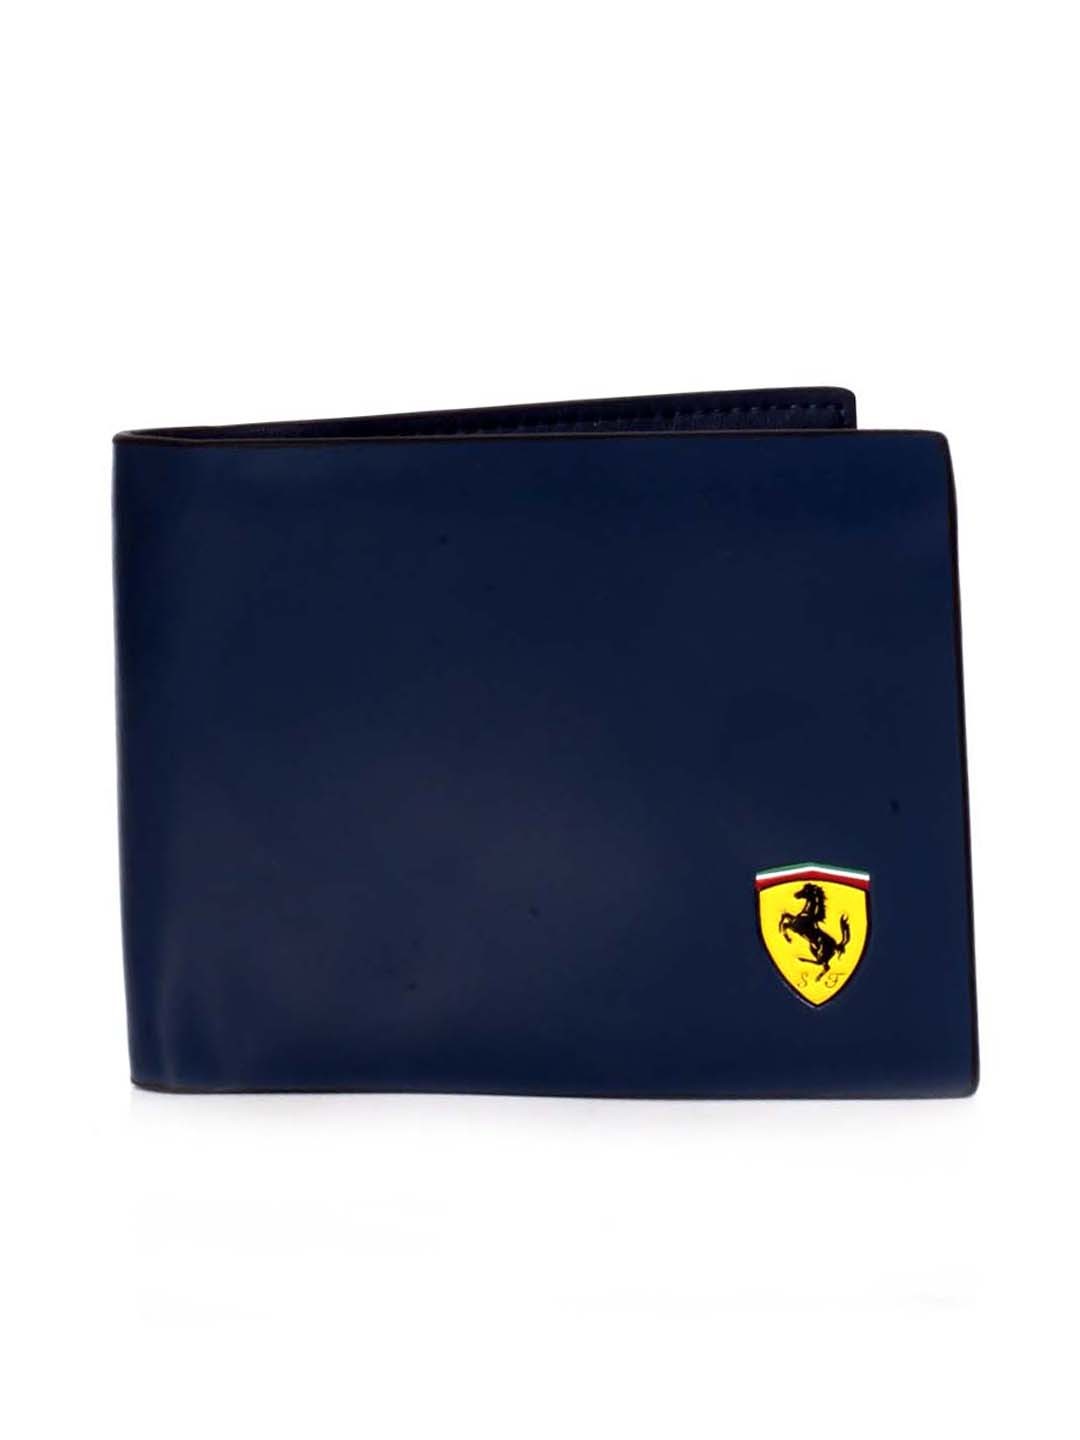 Blue Stylish Wallet For Men In India - Shopclues Online